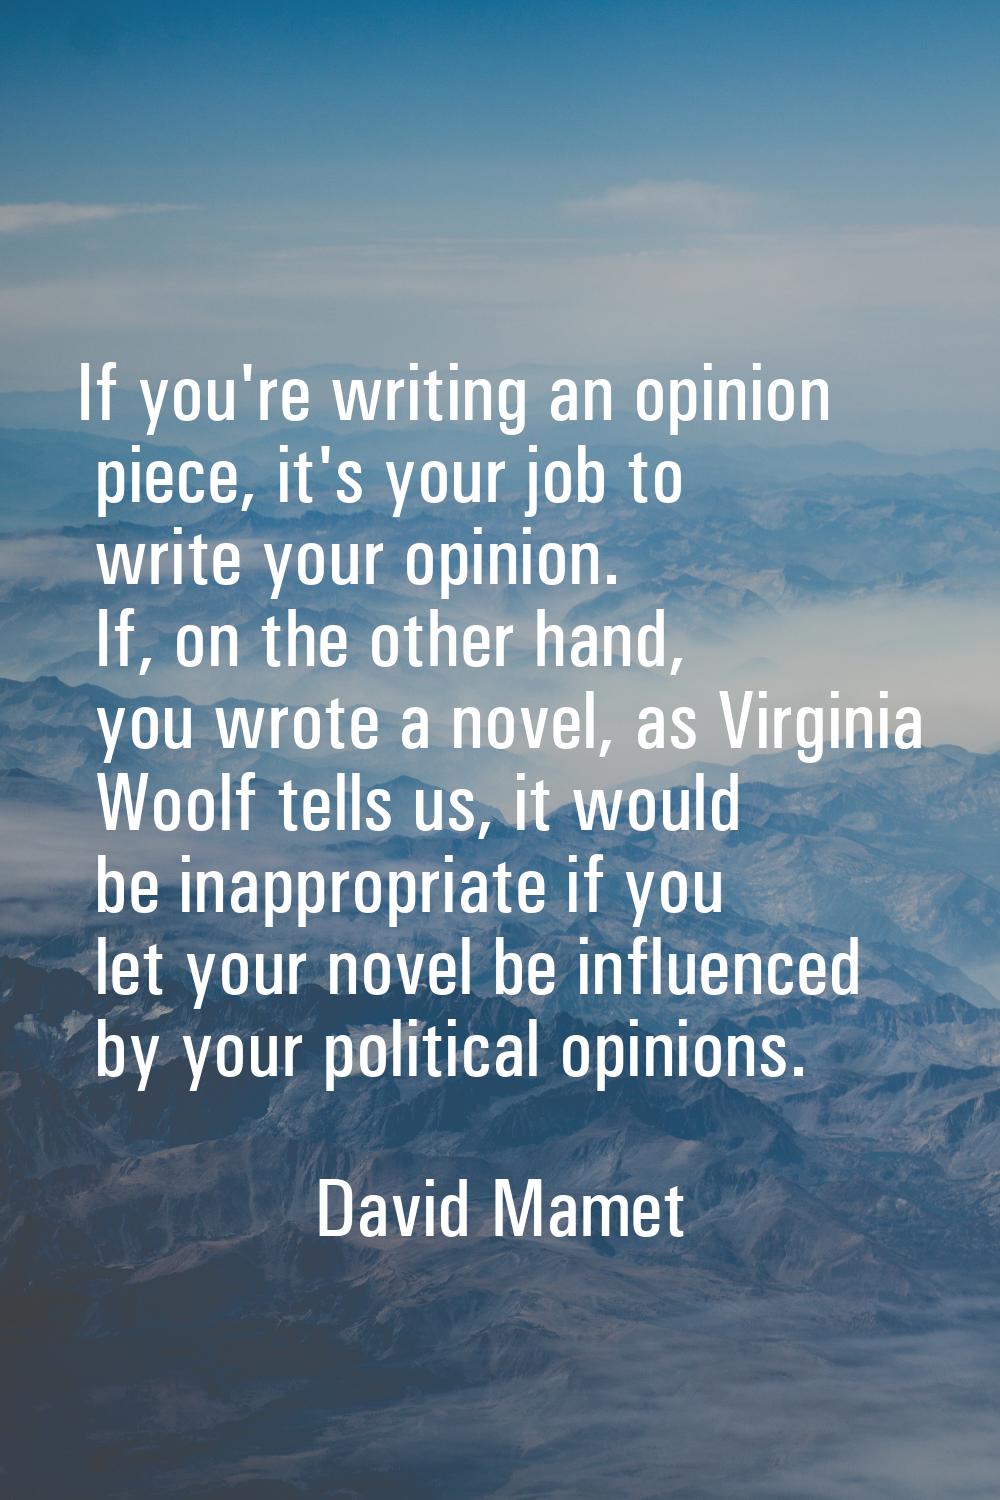 If you're writing an opinion piece, it's your job to write your opinion. If, on the other hand, you